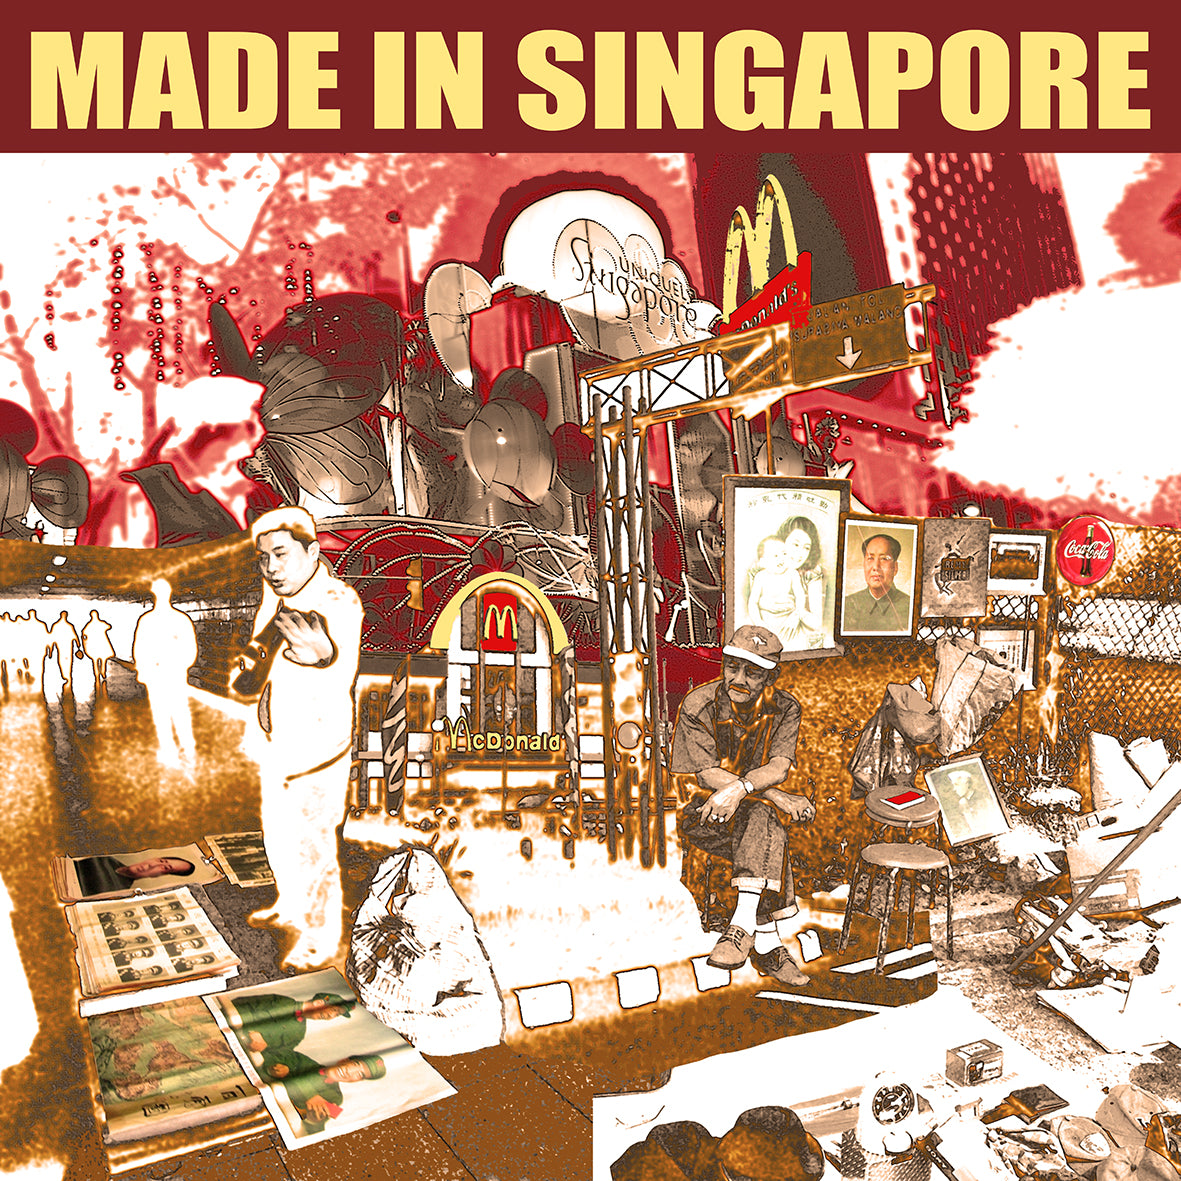 MADE IN SINGAPORE